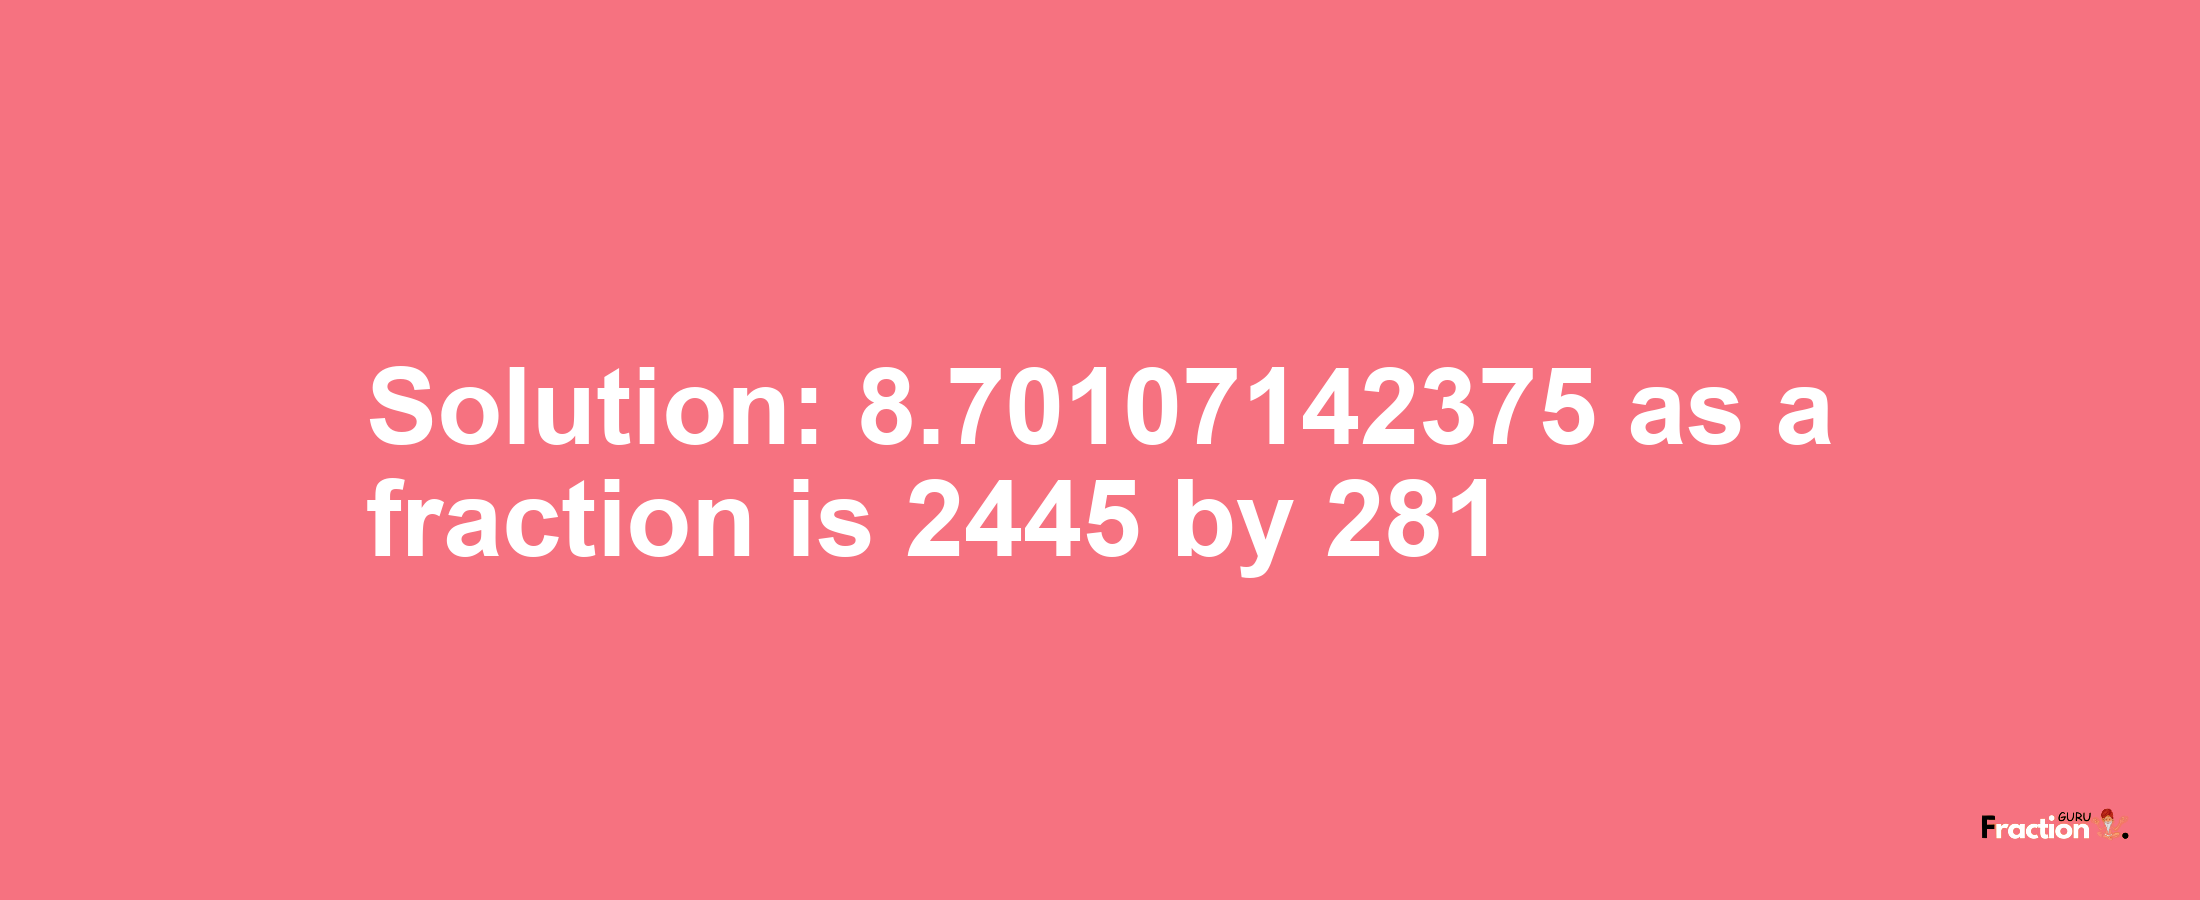 Solution:8.70107142375 as a fraction is 2445/281